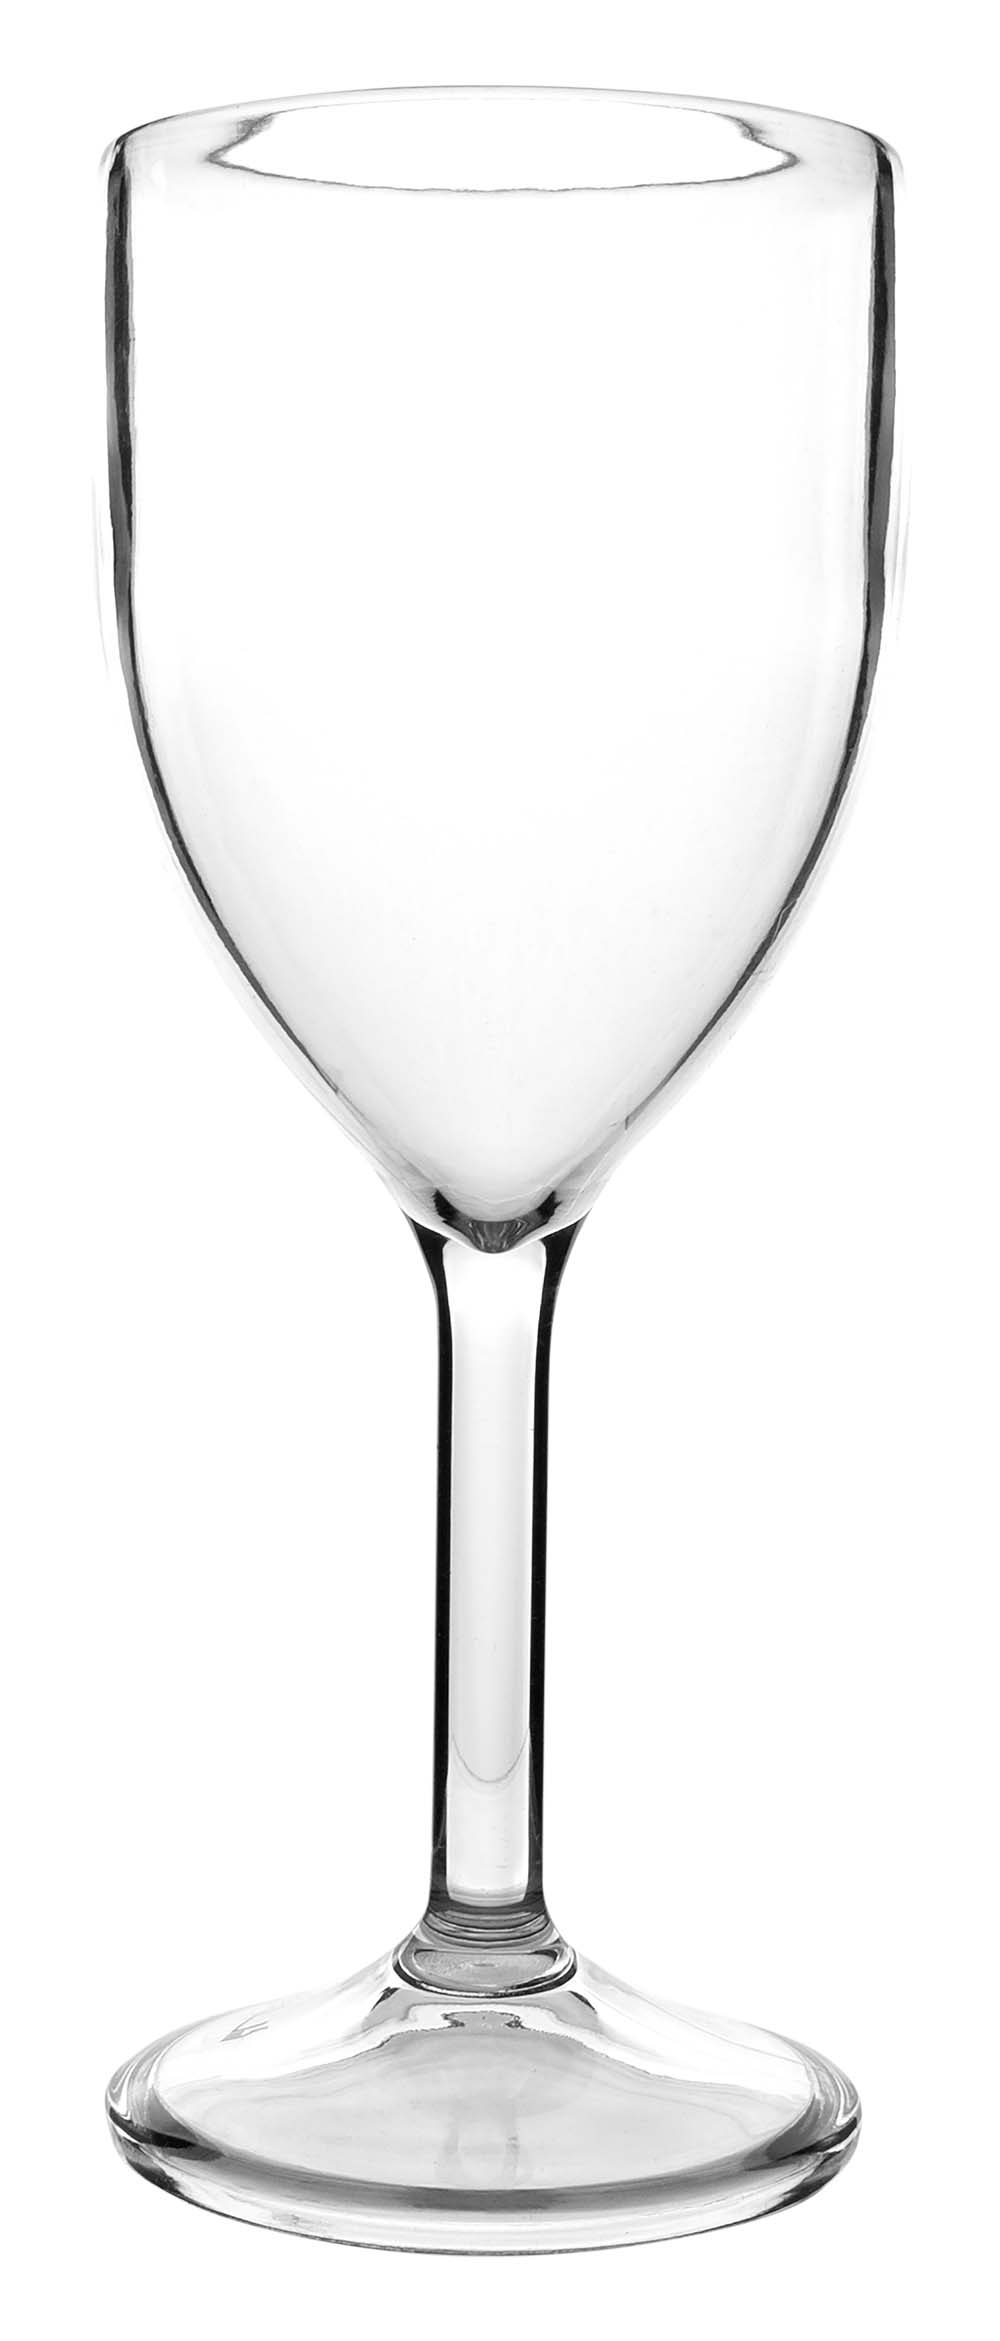 6101442 An extra sturdy and luxurious set of wine glasses. Made of 100% polycarbonate This makes the glasses almost unbreakable, light weight and scratch proof. The glasses are also dishwasher safe. Packed in units of 2.